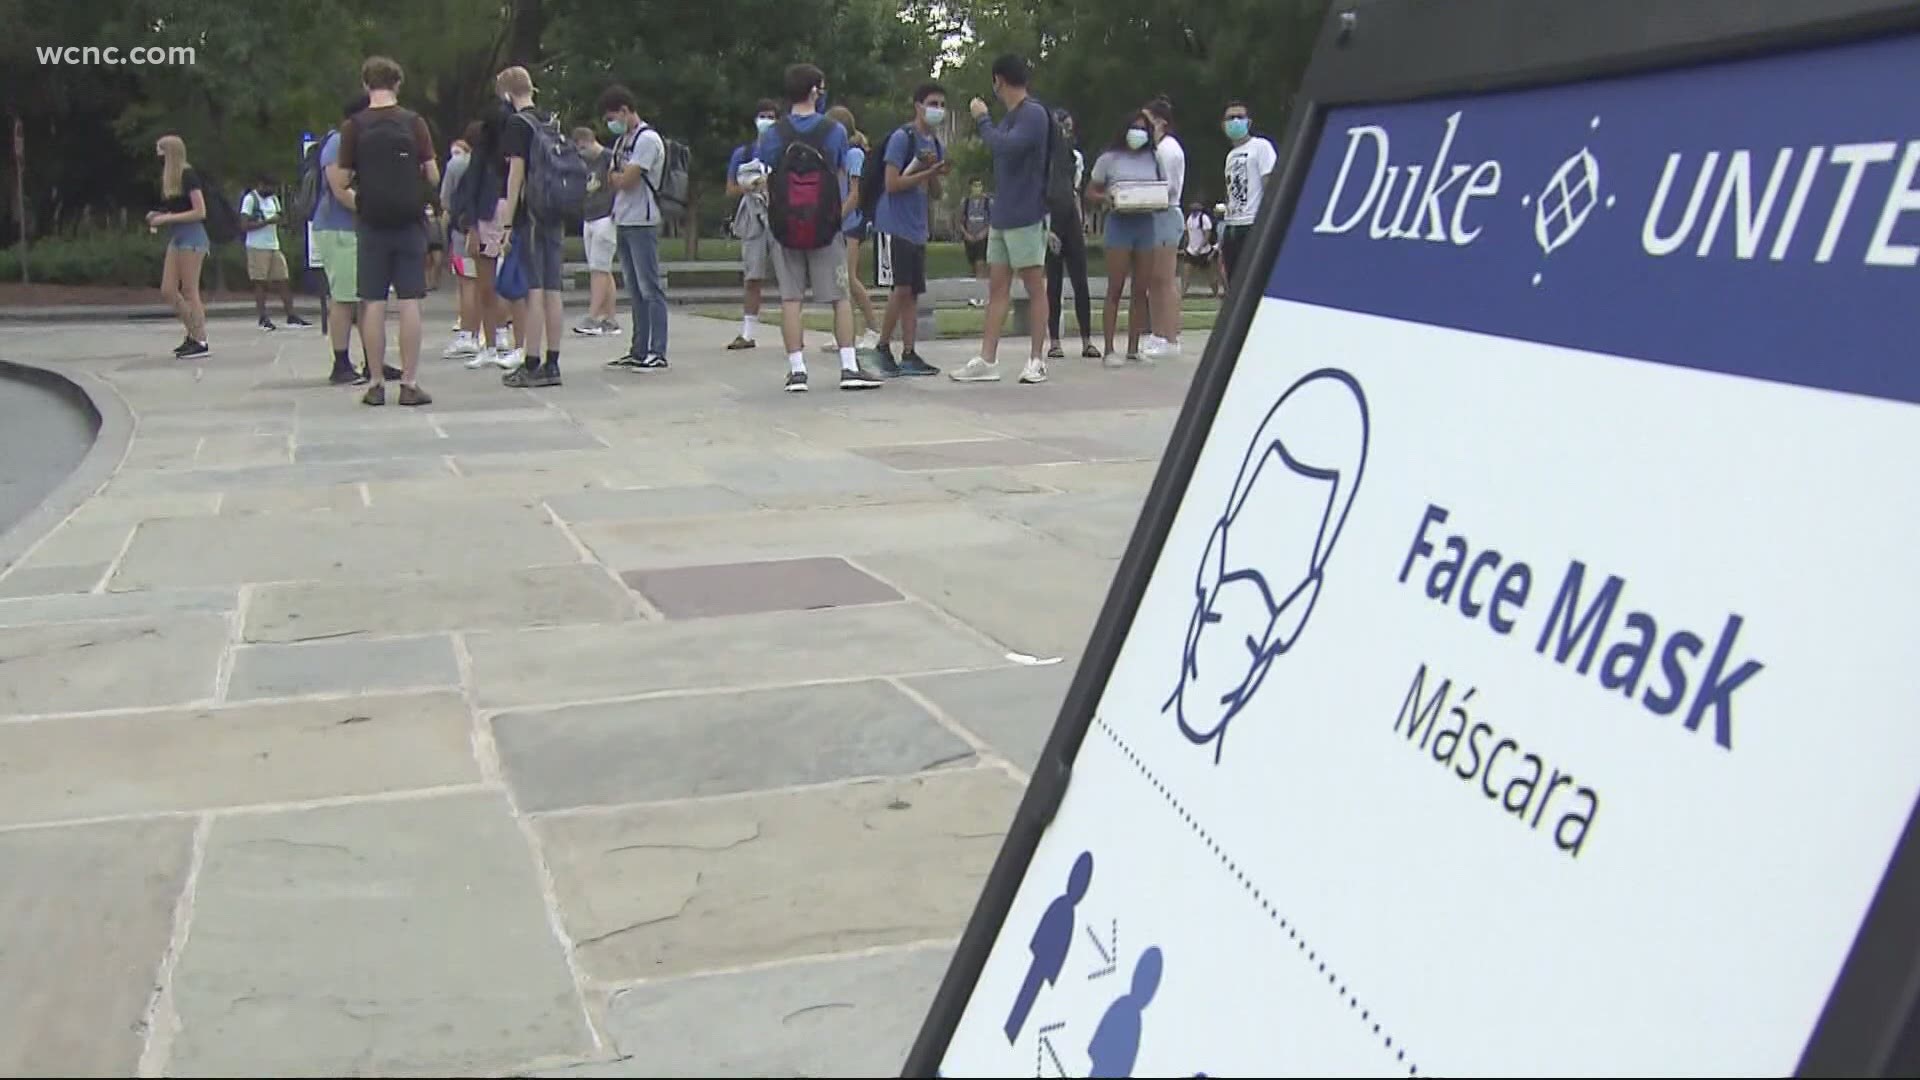 Duke is now the first university in North Carolina to require proof of vaccination.